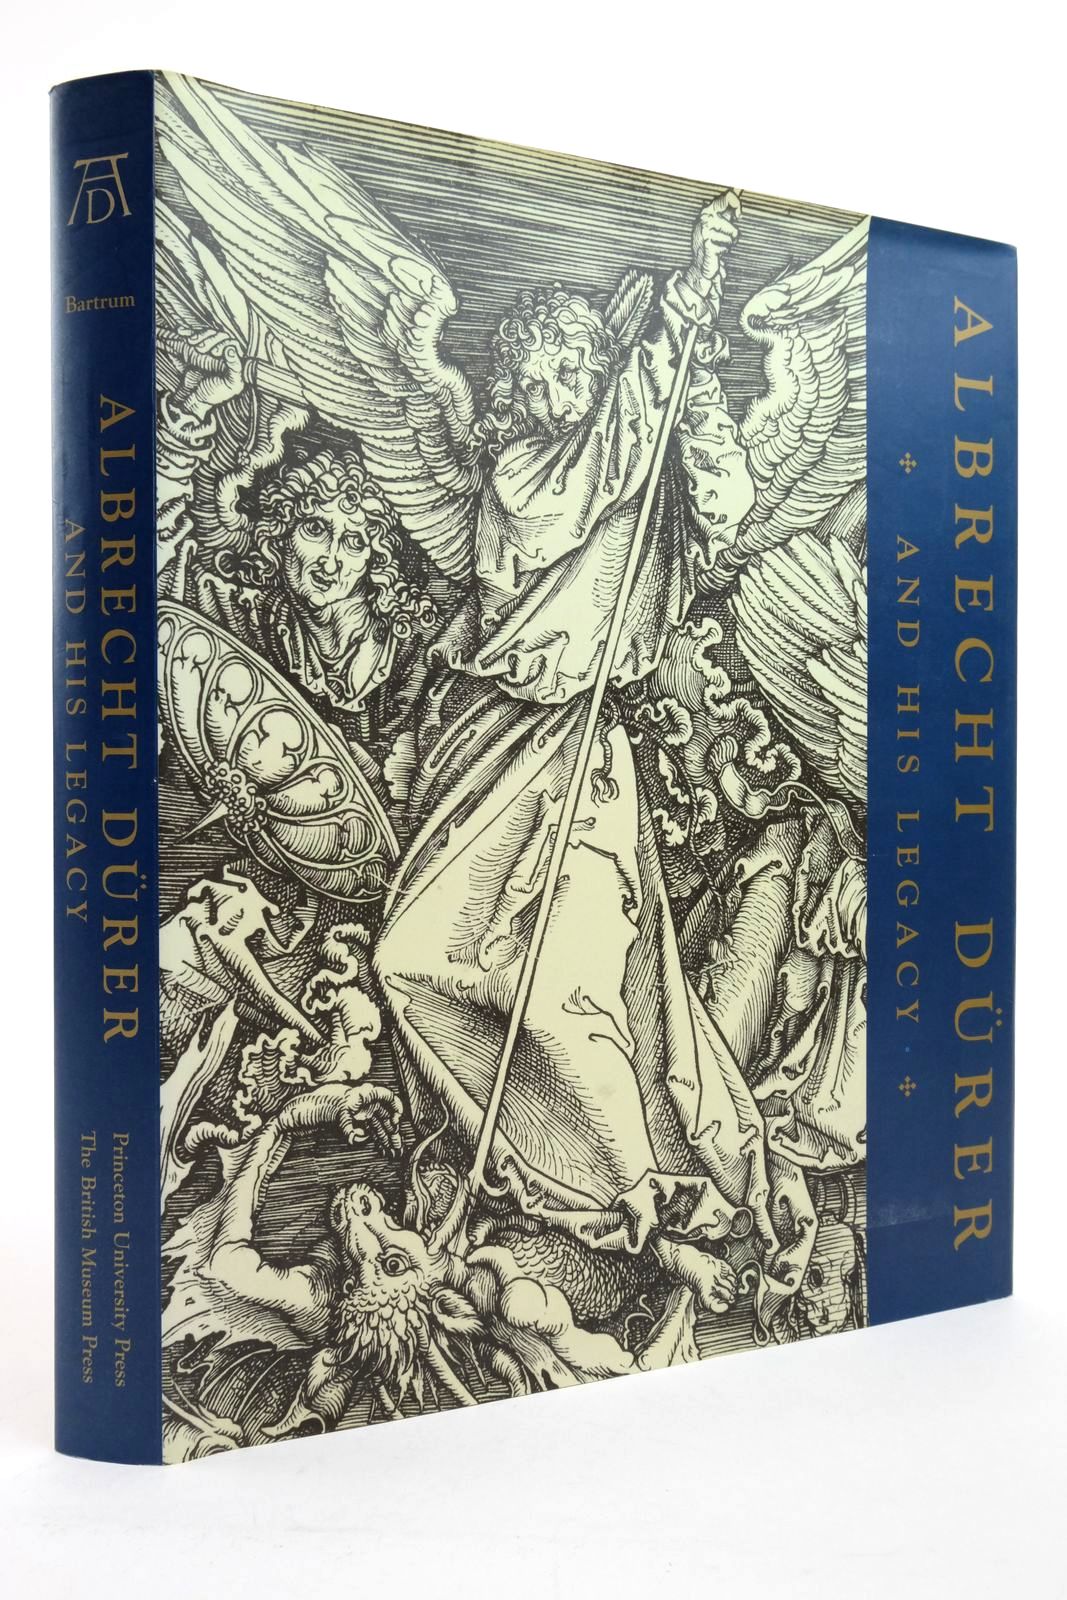 Photo of ALBRECHT DURER AND HIS LEGACY: THE GRAPHIC WORK OF A RENAISSANCE ARTIST written by Bartrum, Giulia et al, illustrated by Durer, Albrecht published by British Museum Press, Princeton University Press (STOCK CODE: 2138863)  for sale by Stella & Rose's Books